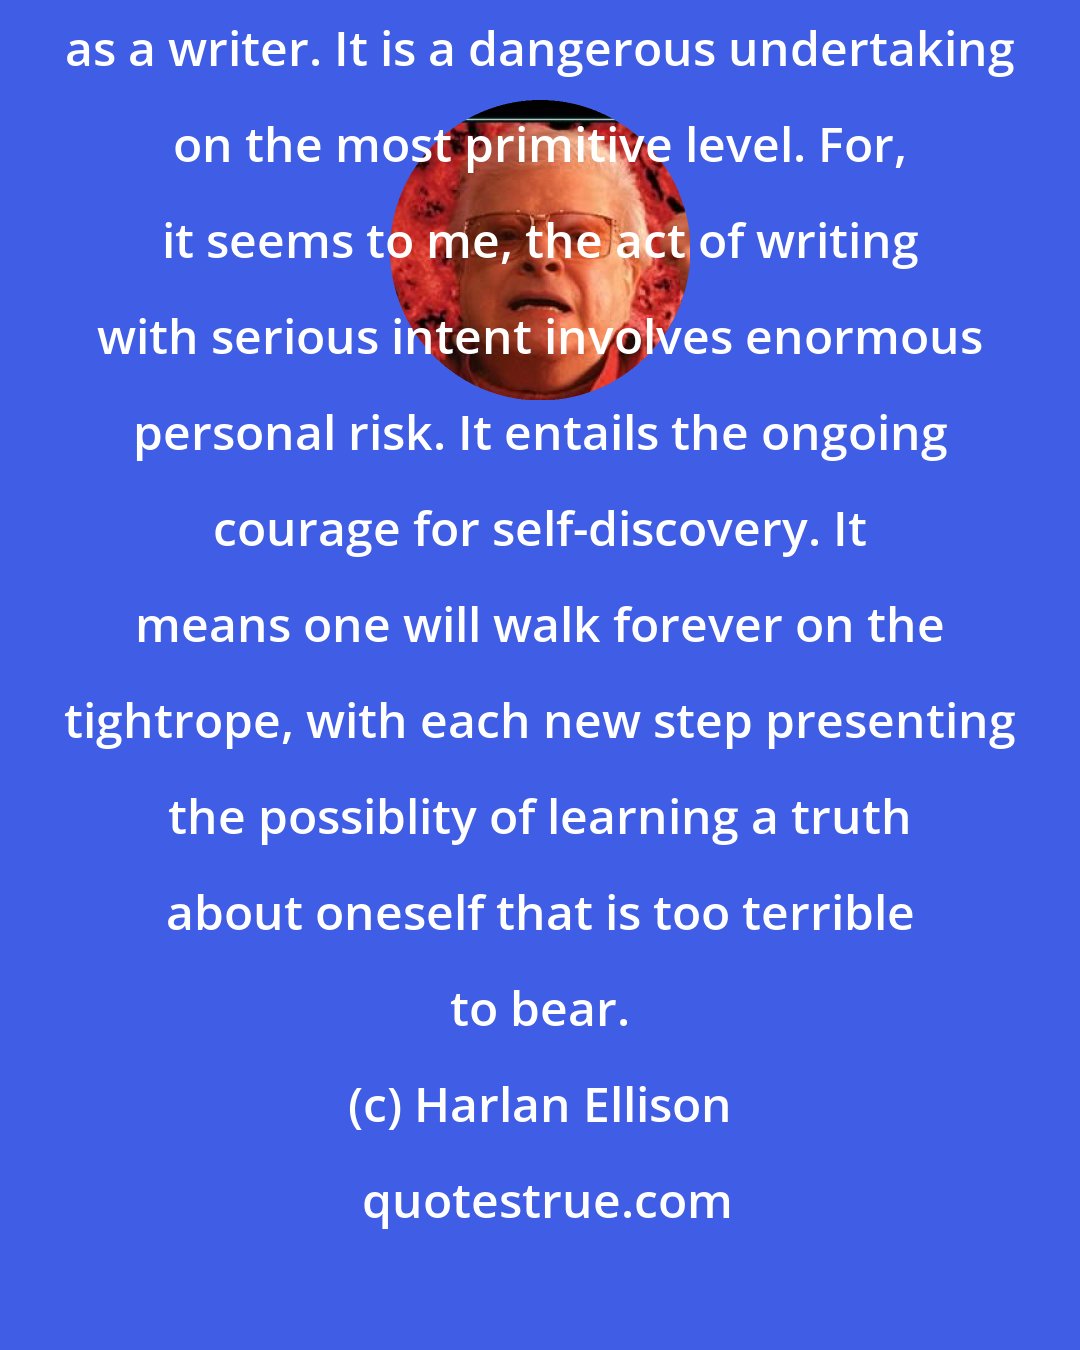 Harlan Ellison: It is not merely enough to love literature if one wishes to spend one's life as a writer. It is a dangerous undertaking on the most primitive level. For, it seems to me, the act of writing with serious intent involves enormous personal risk. It entails the ongoing courage for self-discovery. It means one will walk forever on the tightrope, with each new step presenting the possiblity of learning a truth about oneself that is too terrible to bear.